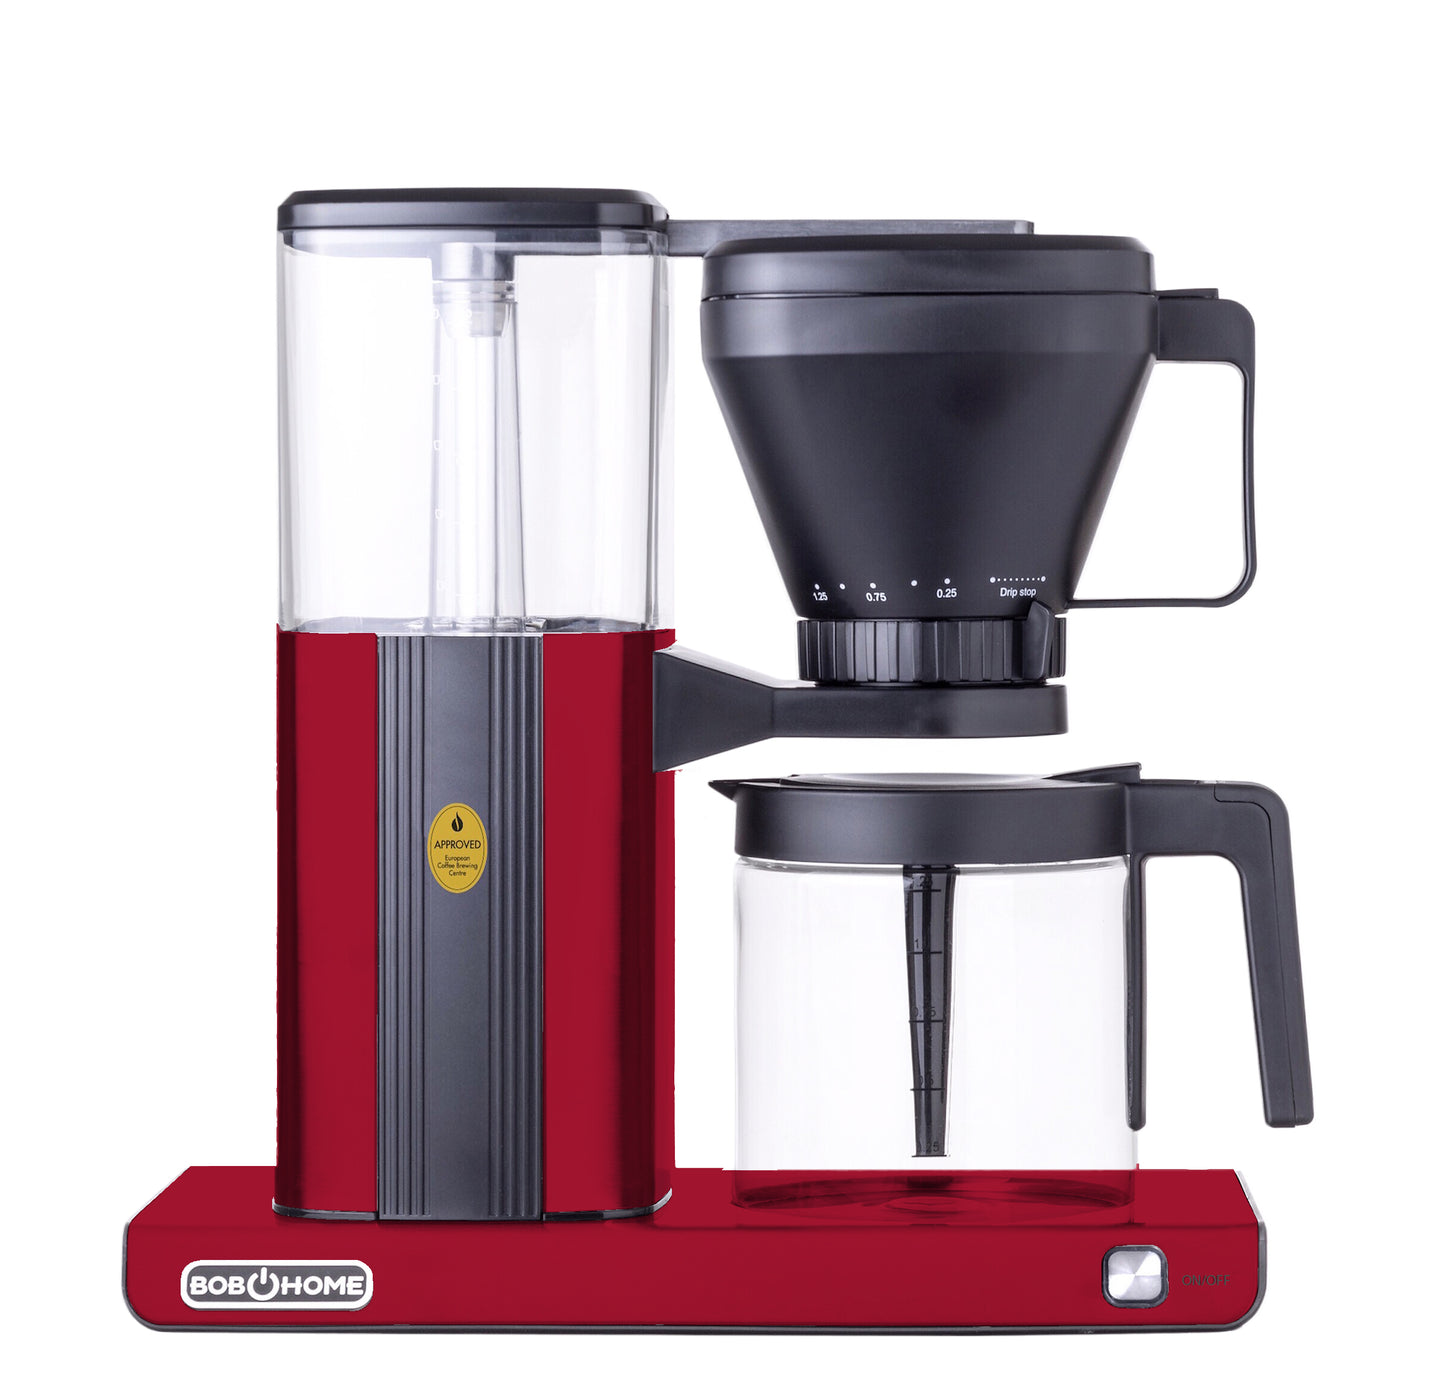 Filterkaffeemaschine PERFECT CAFE - ROT - BOB HOME - modern lifestyle products